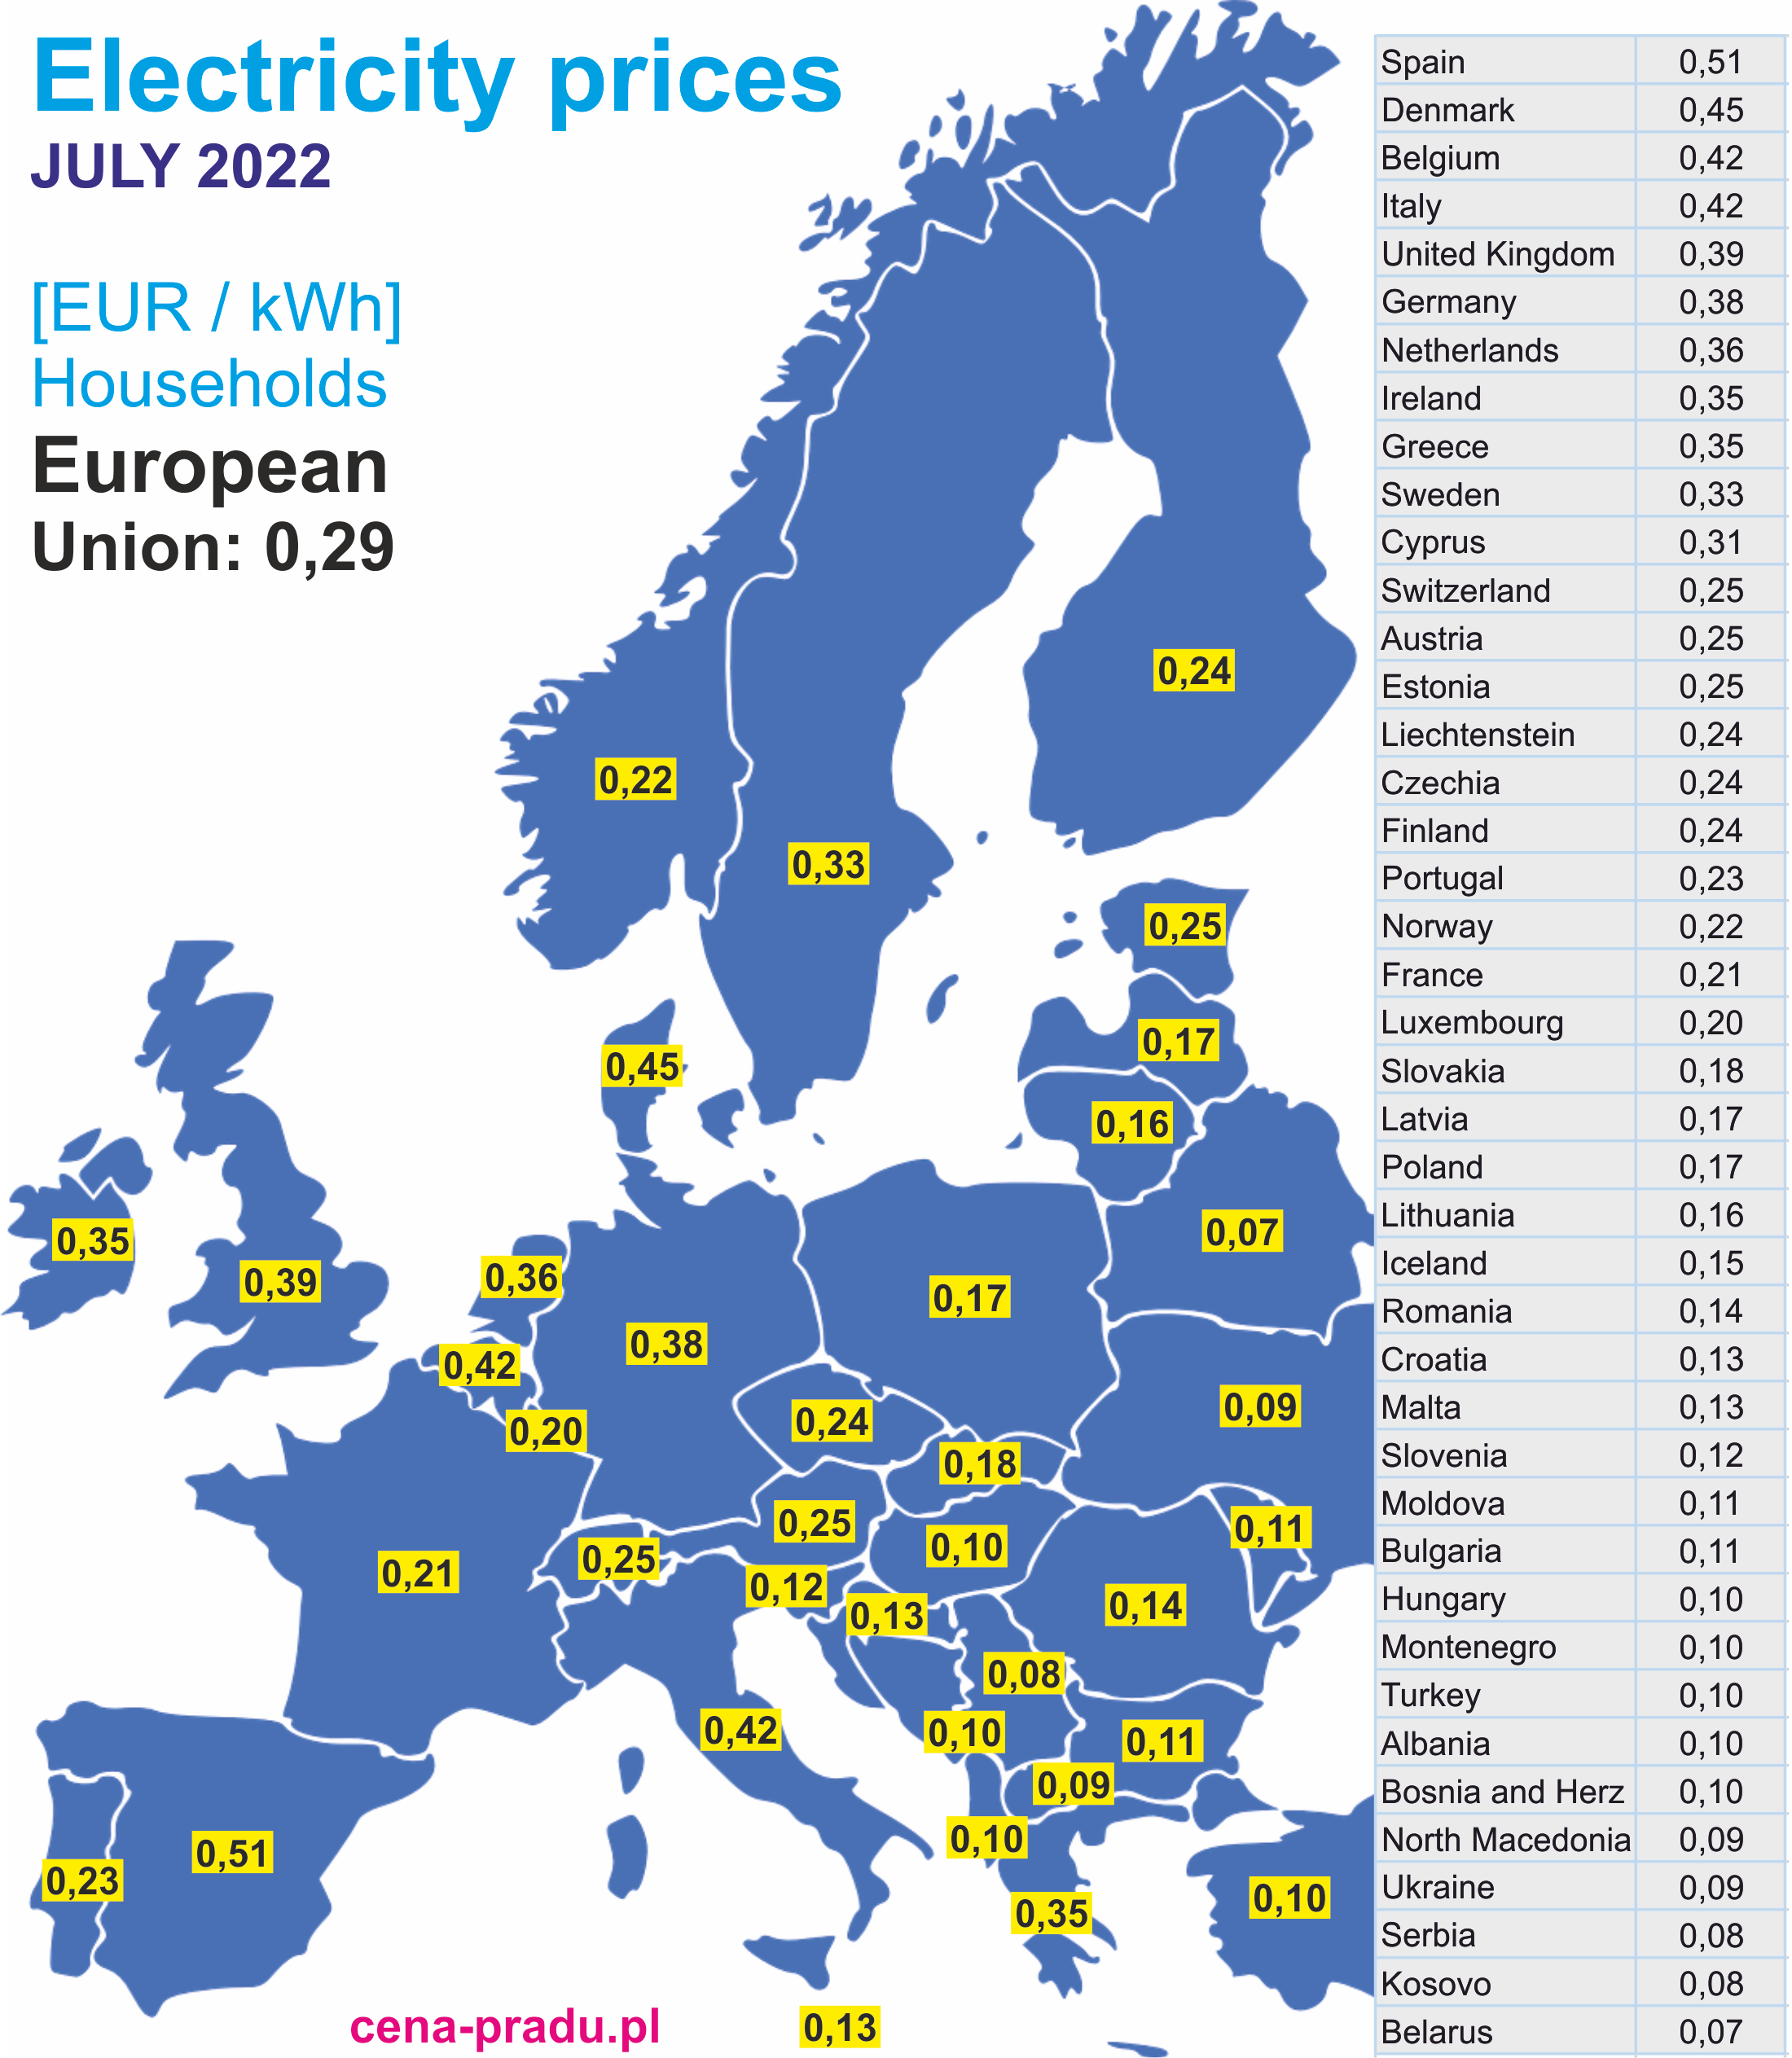 ELECTRICITY PRICES HOUSEHOLDS European Union 0,29 EUR/kWh [JULY 2022]